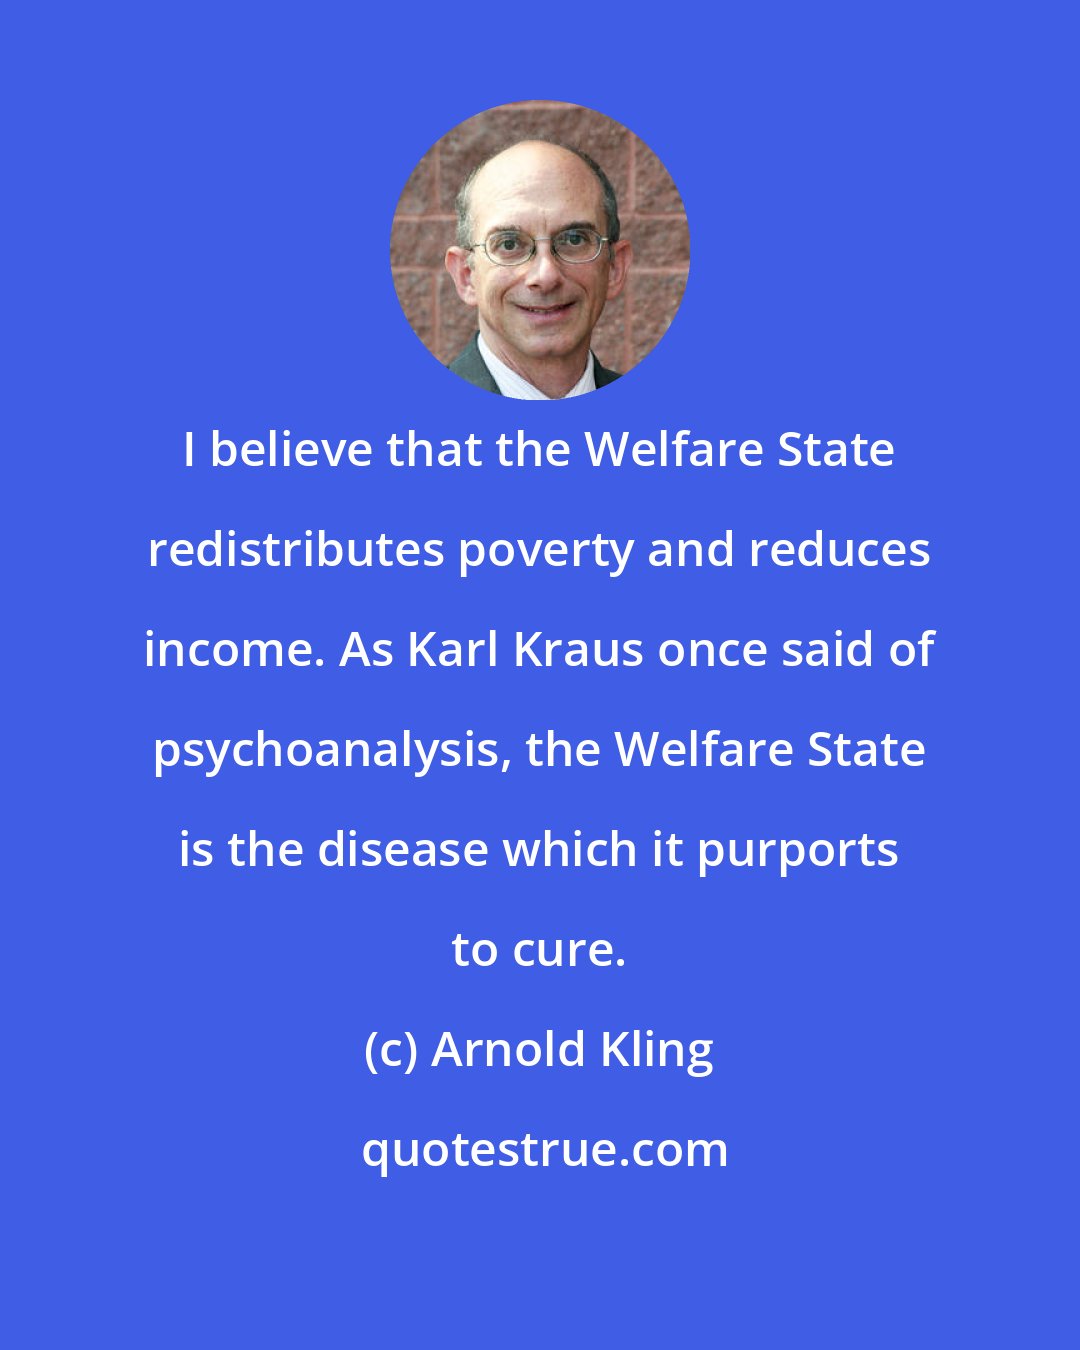 Arnold Kling: I believe that the Welfare State redistributes poverty and reduces income. As Karl Kraus once said of psychoanalysis, the Welfare State is the disease which it purports to cure.